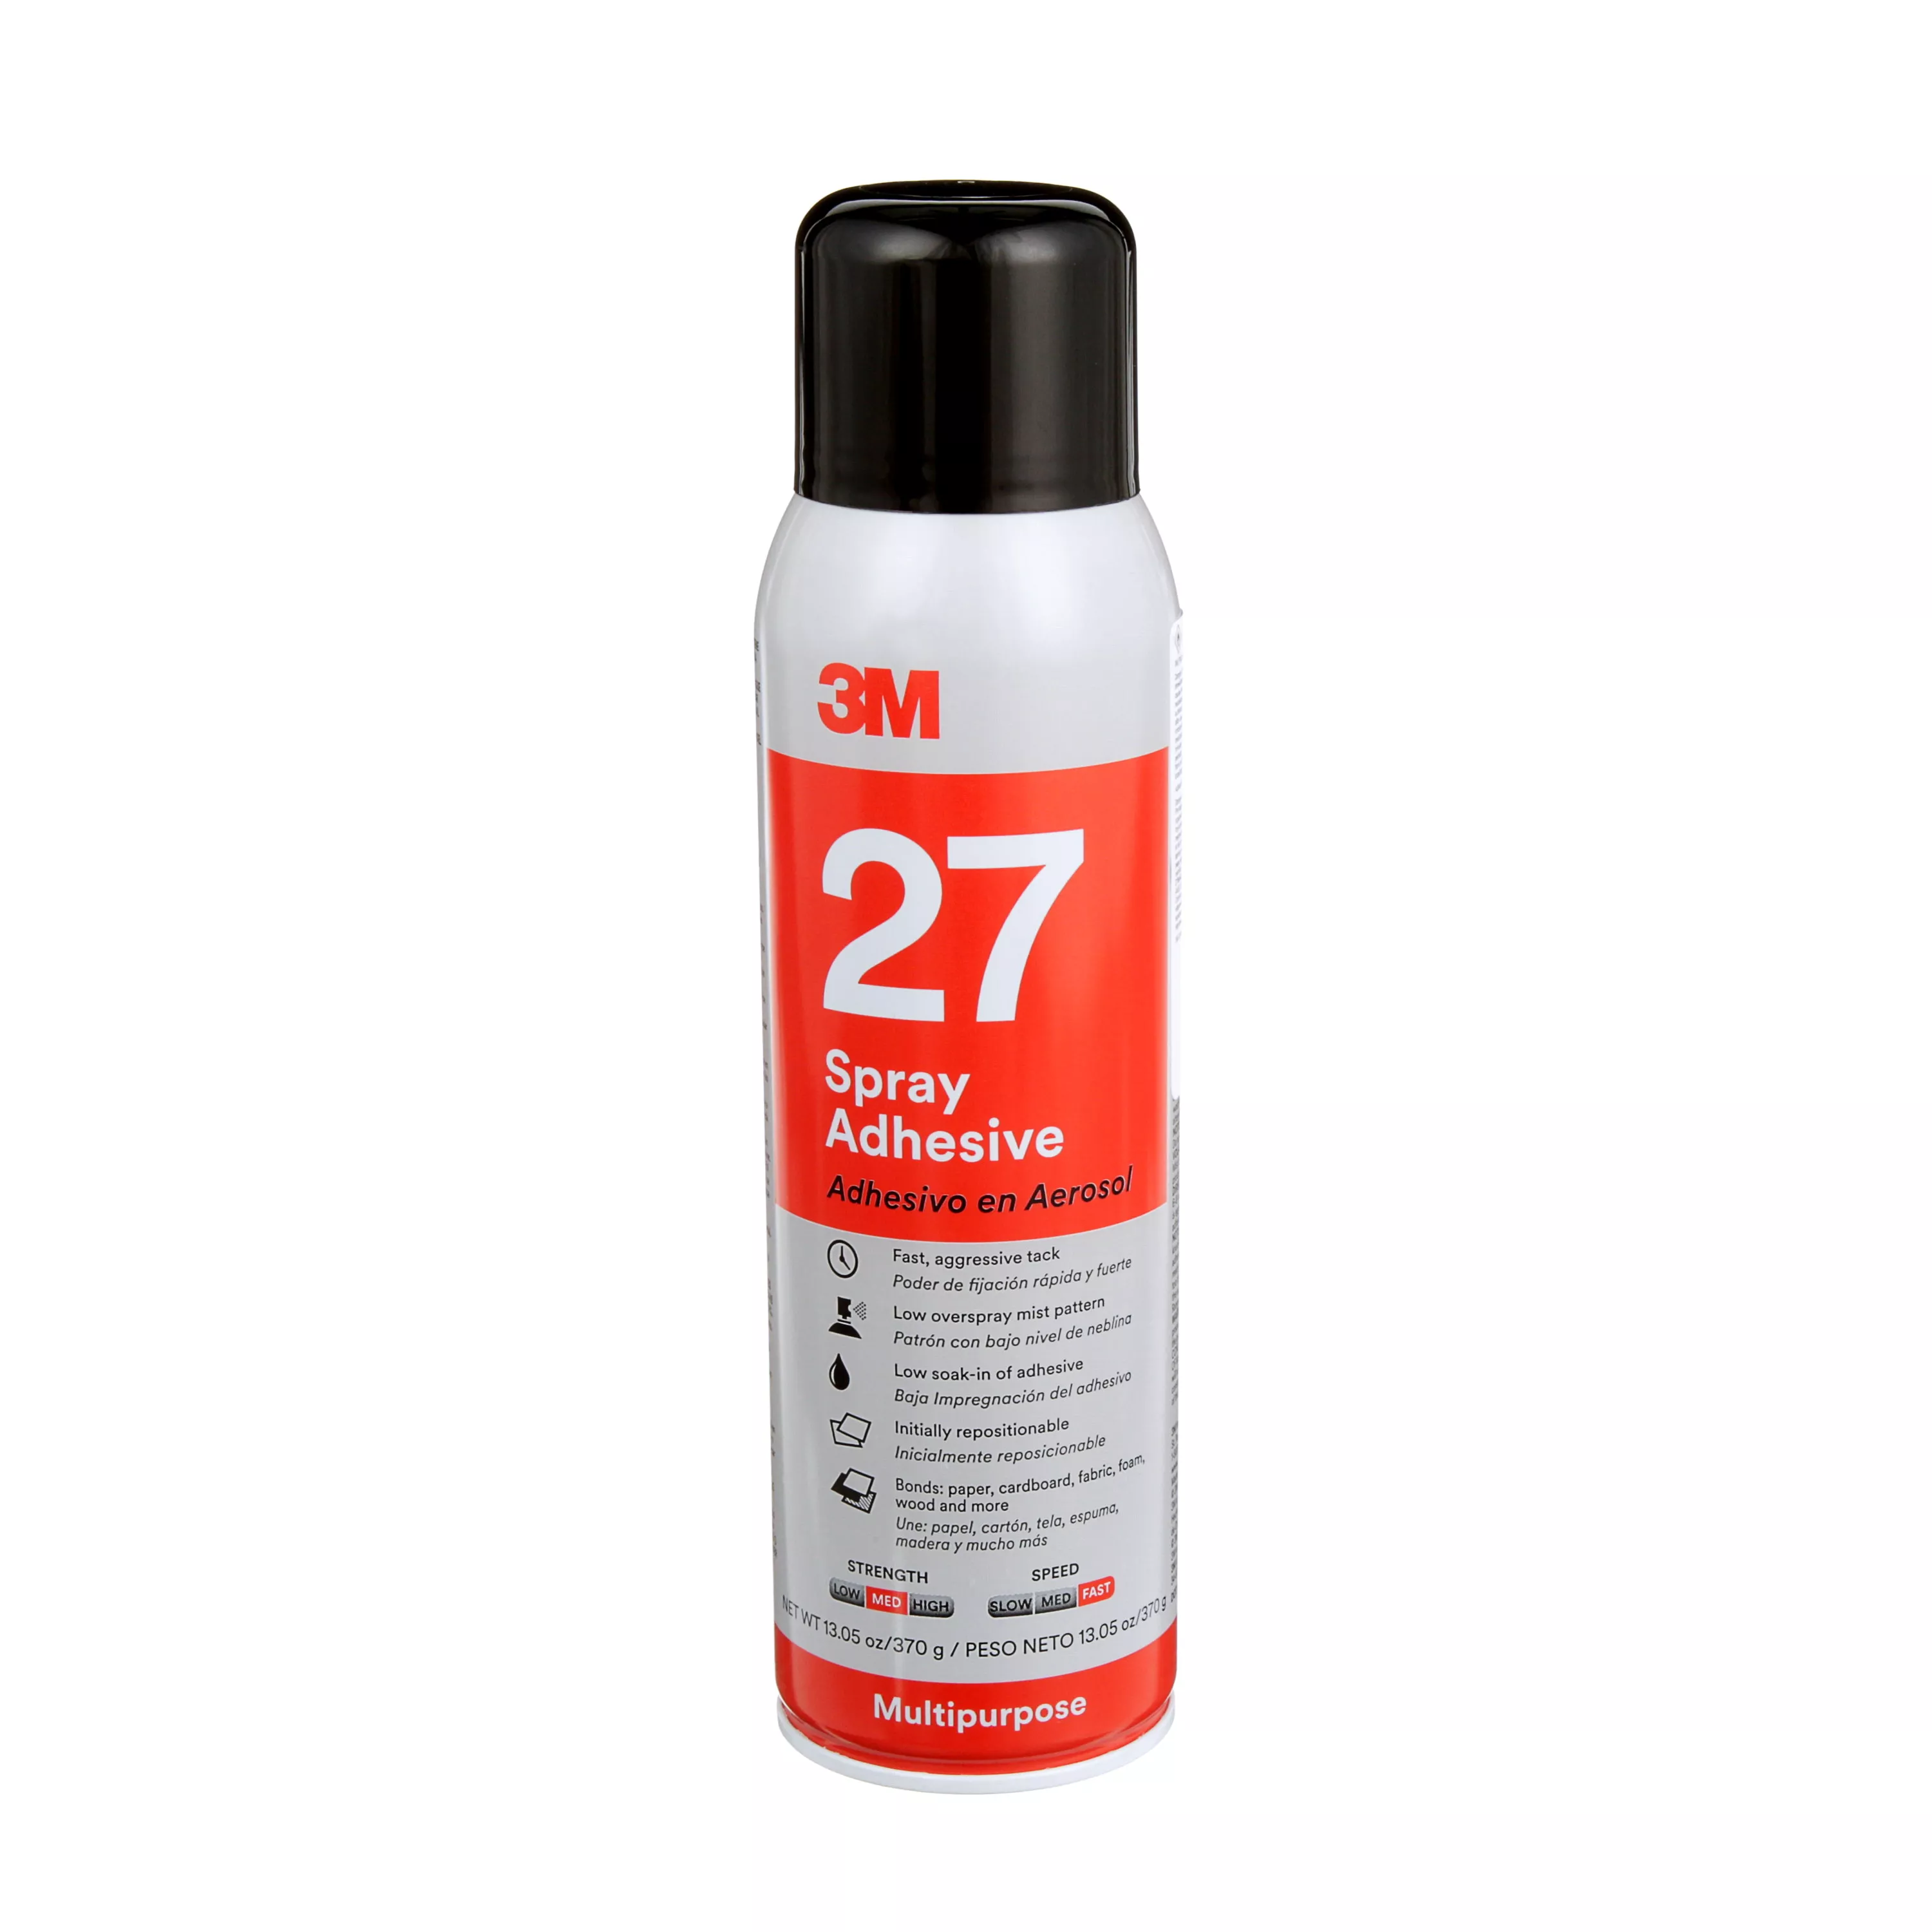 3M™ Multi-Purpose Spray Adhesive 27, Clear, 16 fl oz Can (Net Wt 13.05
oz), 12/Case, NOT FOR SALE IN CA AND OTHER STATES